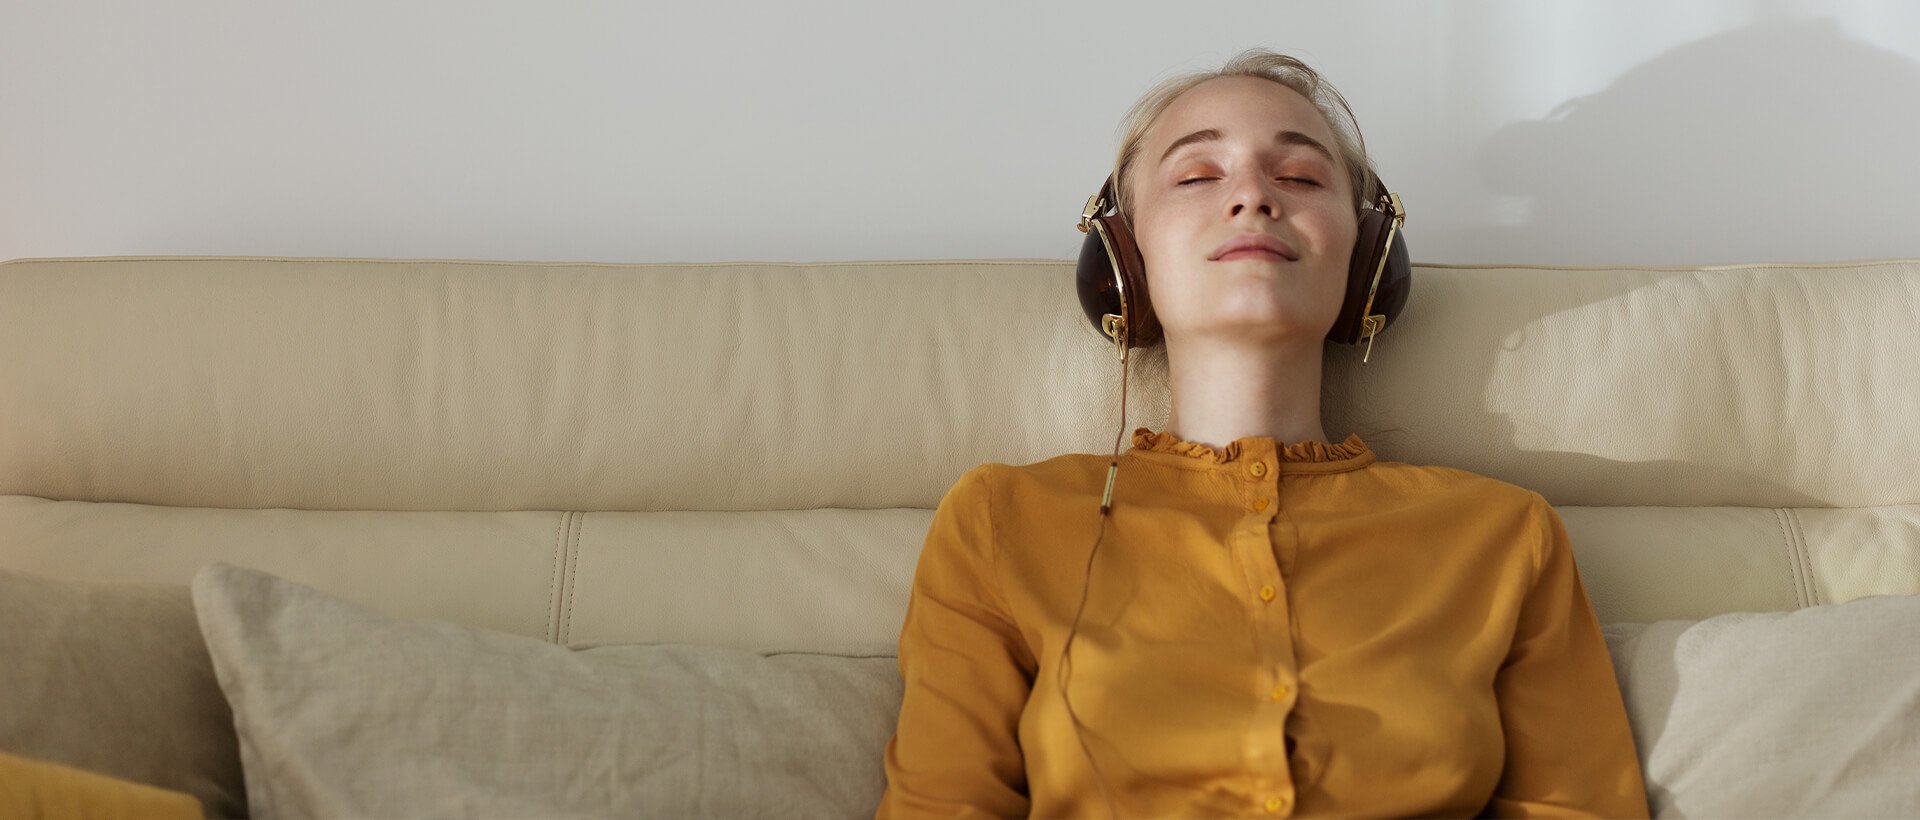 a woman wearing headphones laying on a couch.